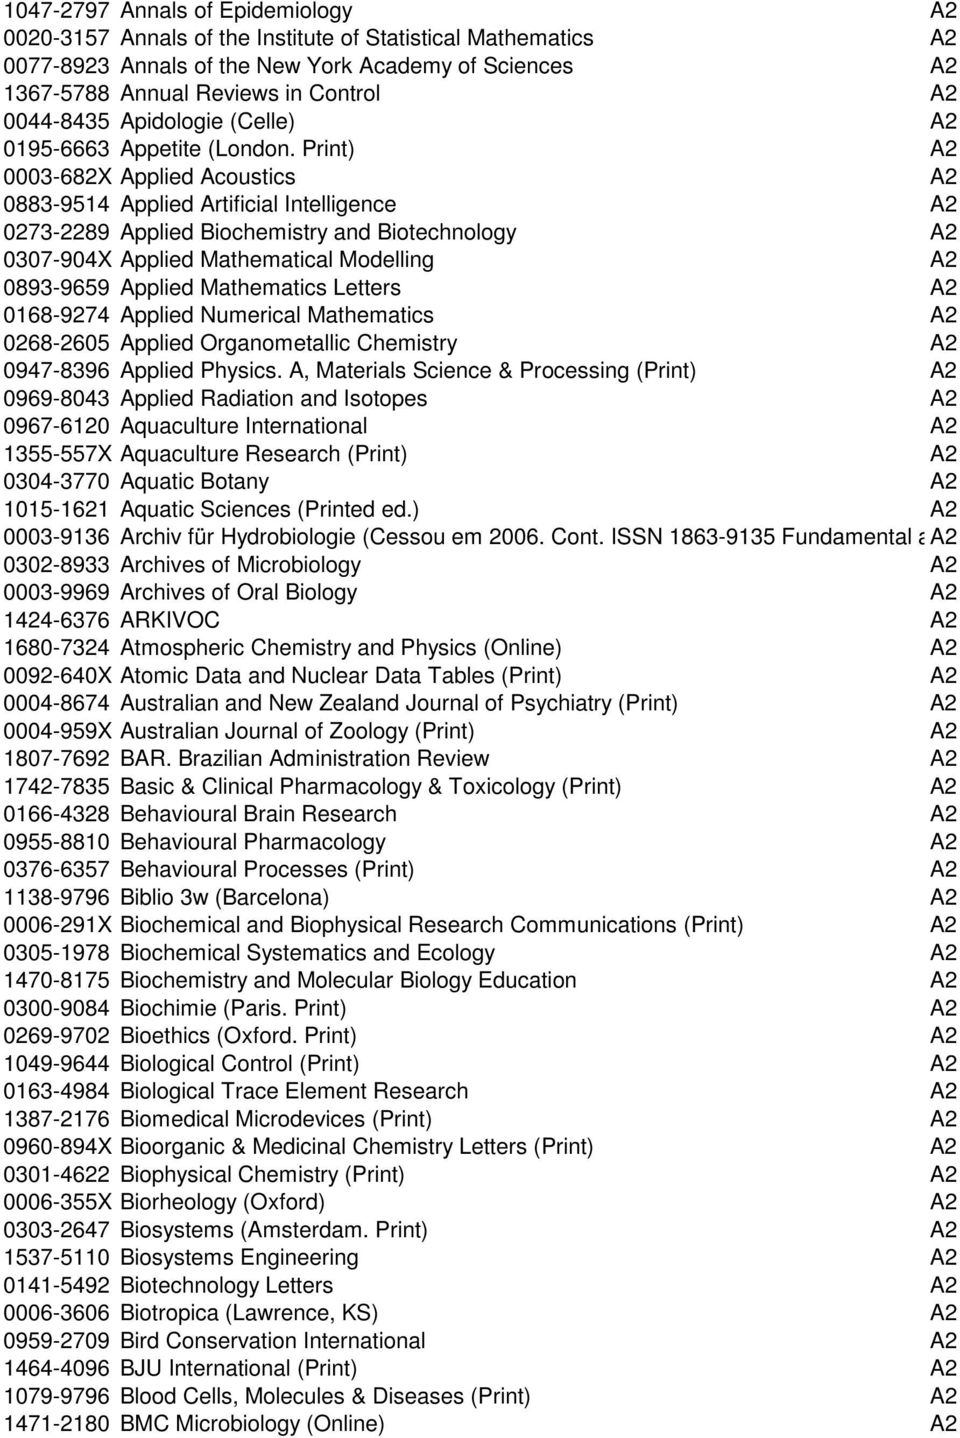 Print) A2 0003-682X Applied Acoustics A2 0883-9514 Applied Artificial Intelligence A2 0273-2289 Applied Biochemistry and Biotechnology A2 0307-904X Applied Mathematical Modelling A2 0893-9659 Applied